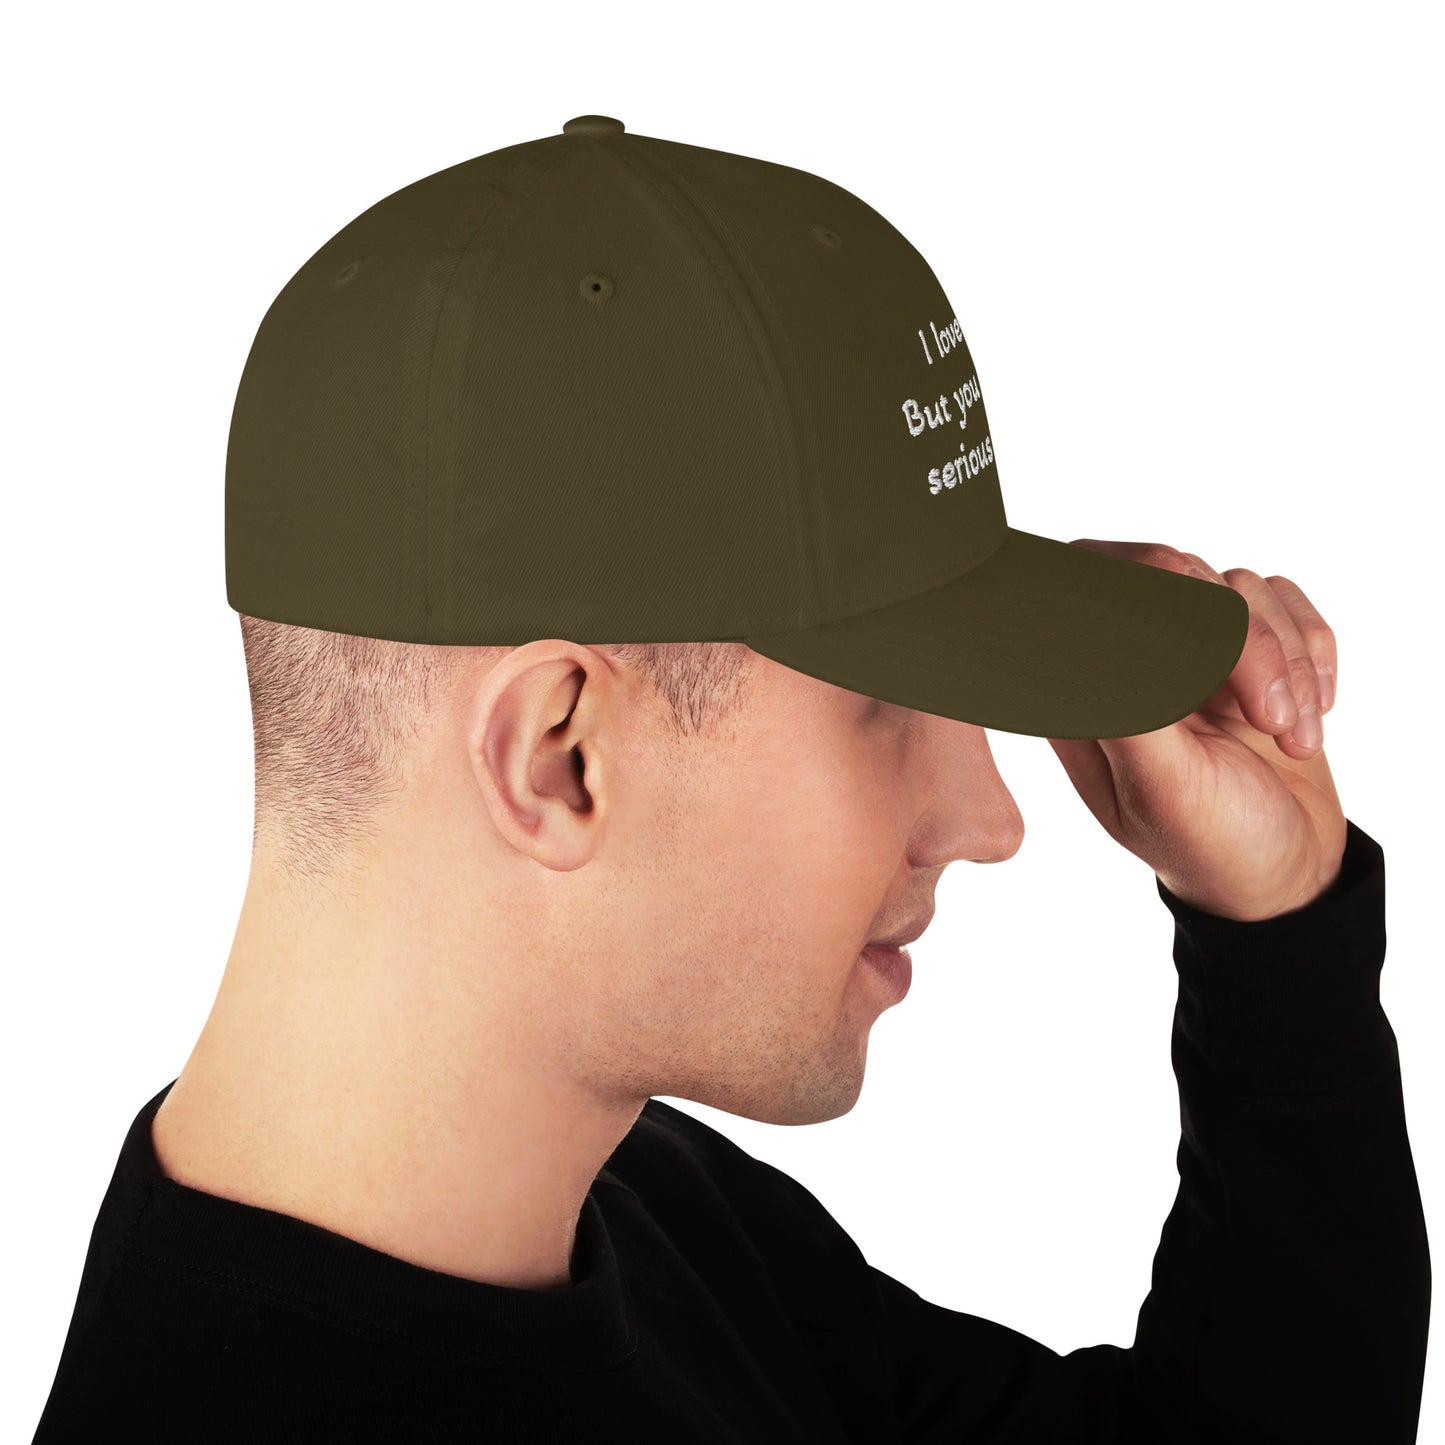 Structured Twill Cap - You're not serious people